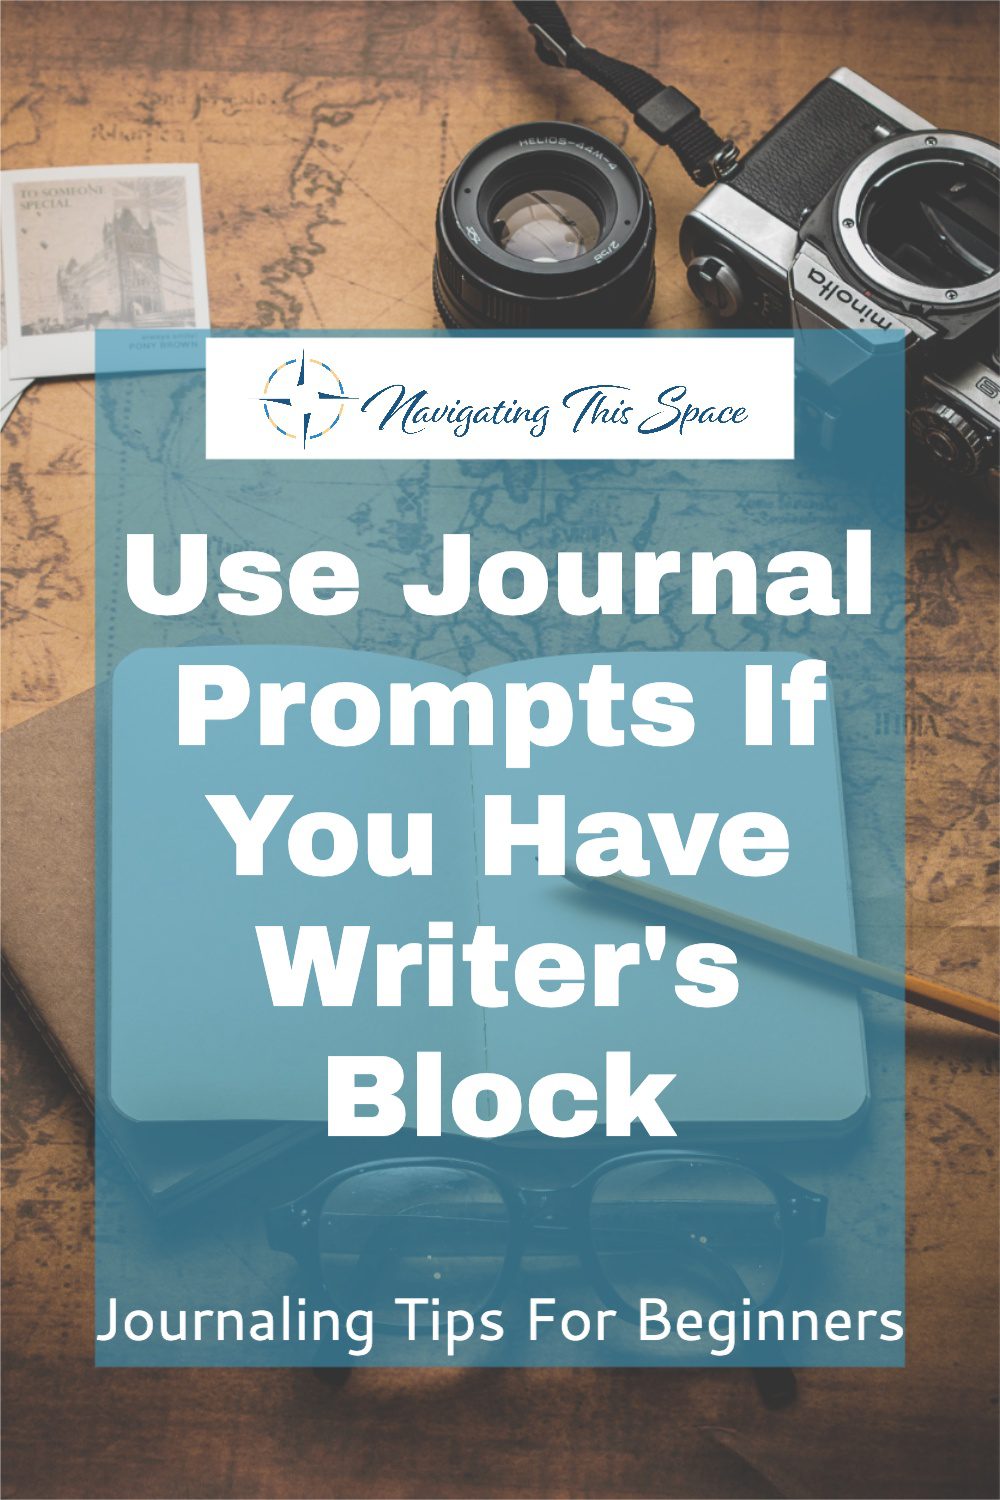 Use journal prompts if you have writer's block